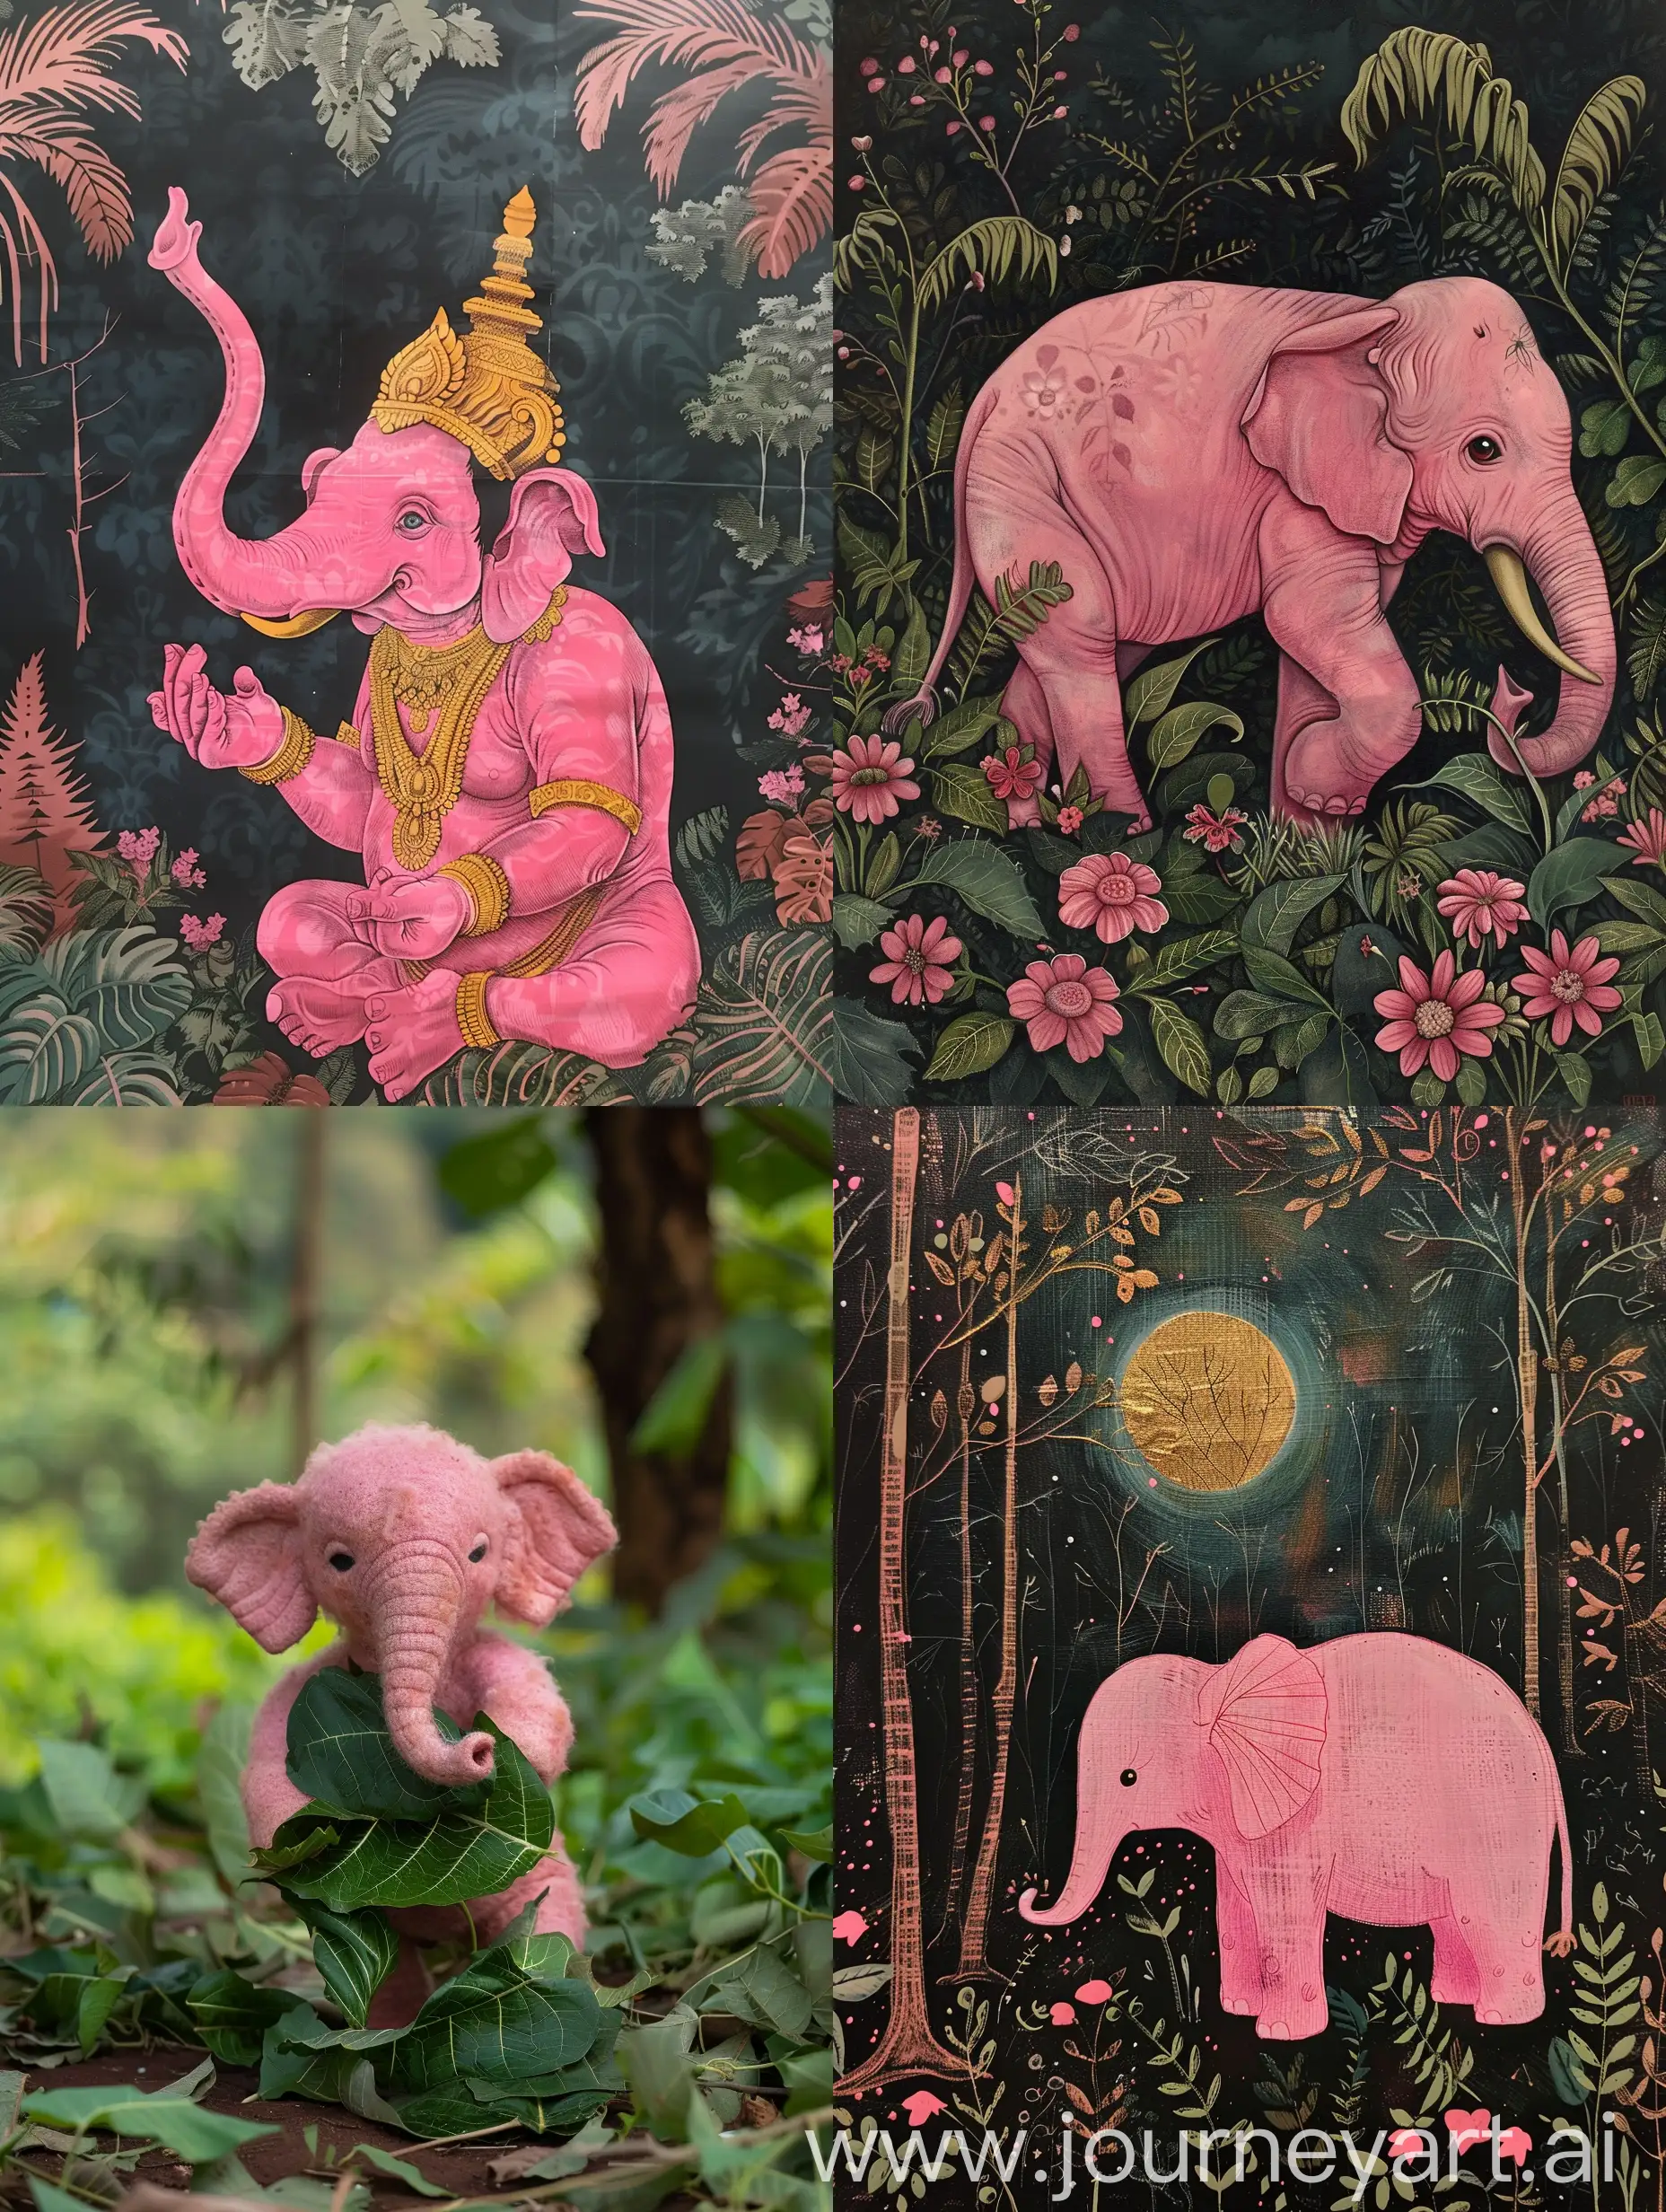 guag with pink elephant
